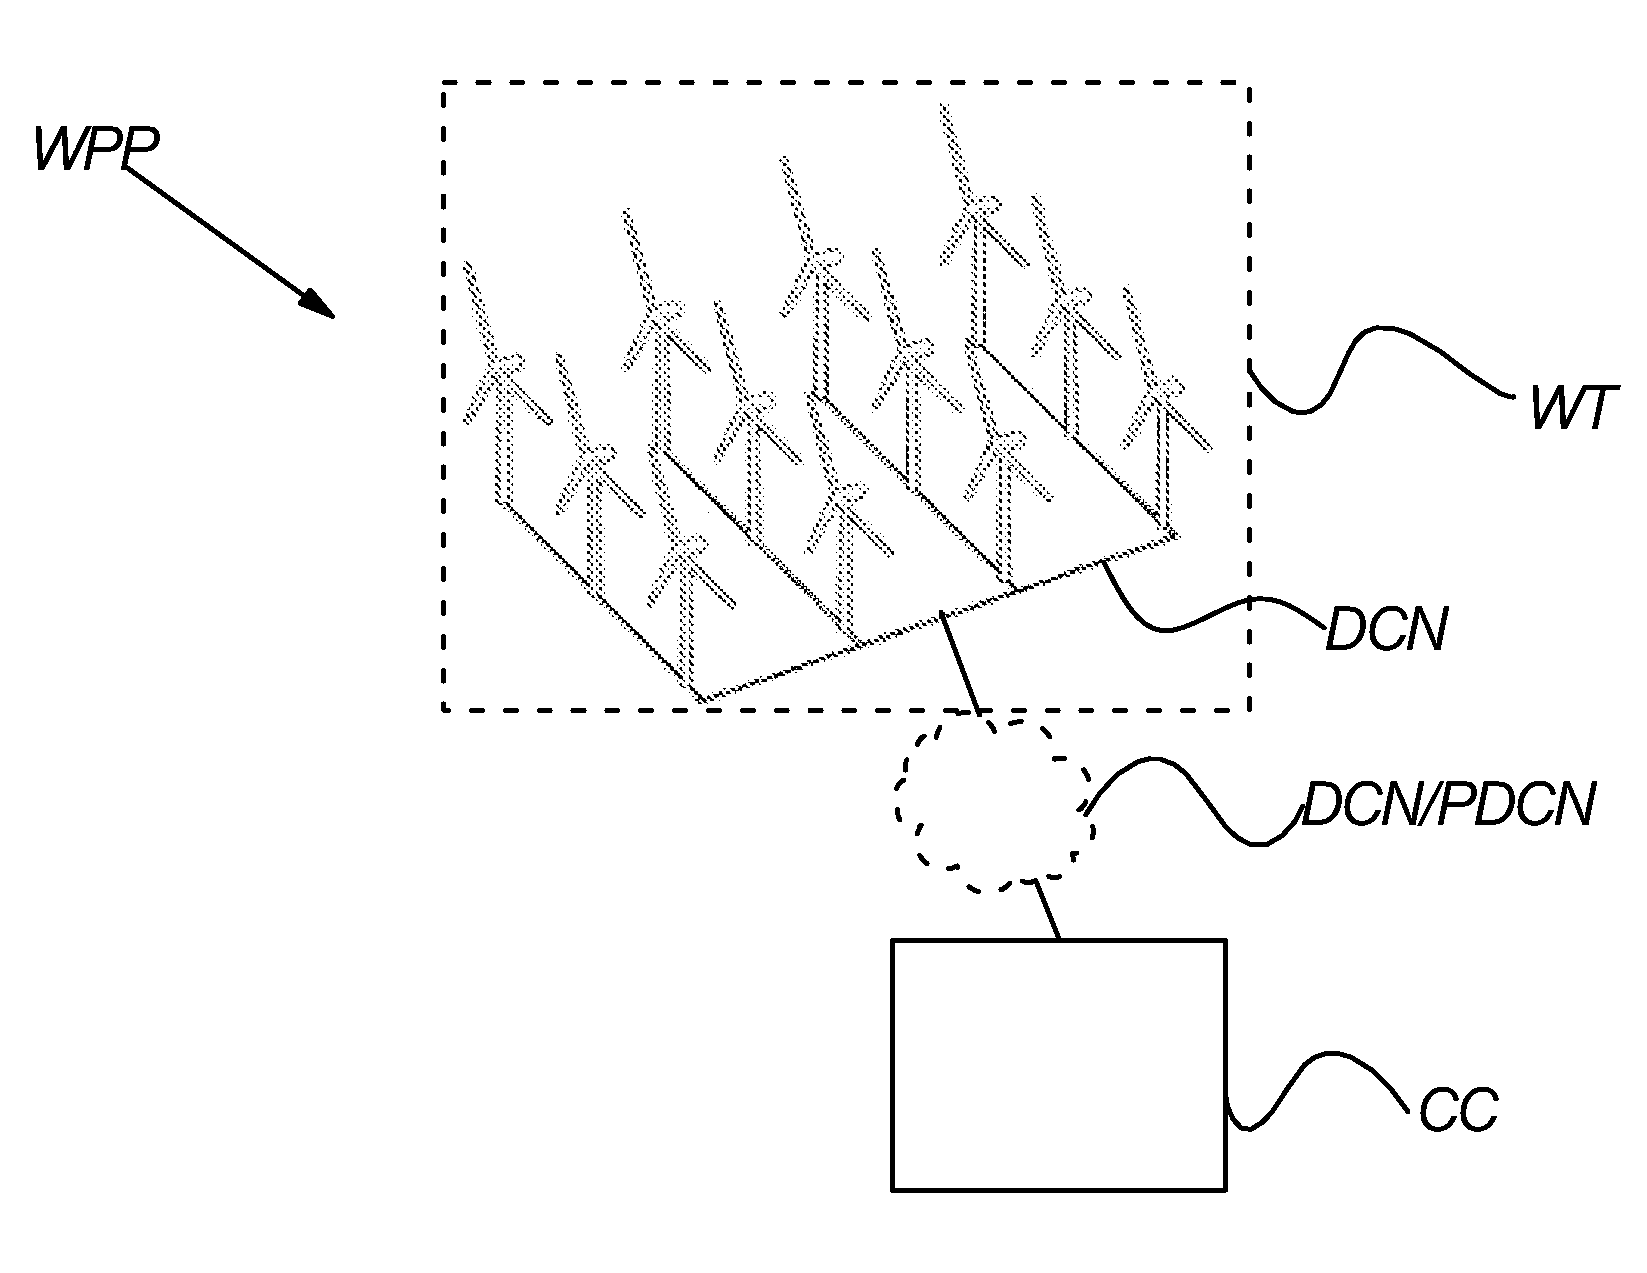 System And Method Of Controlling A Wind Turbine In A Wind Power Plant